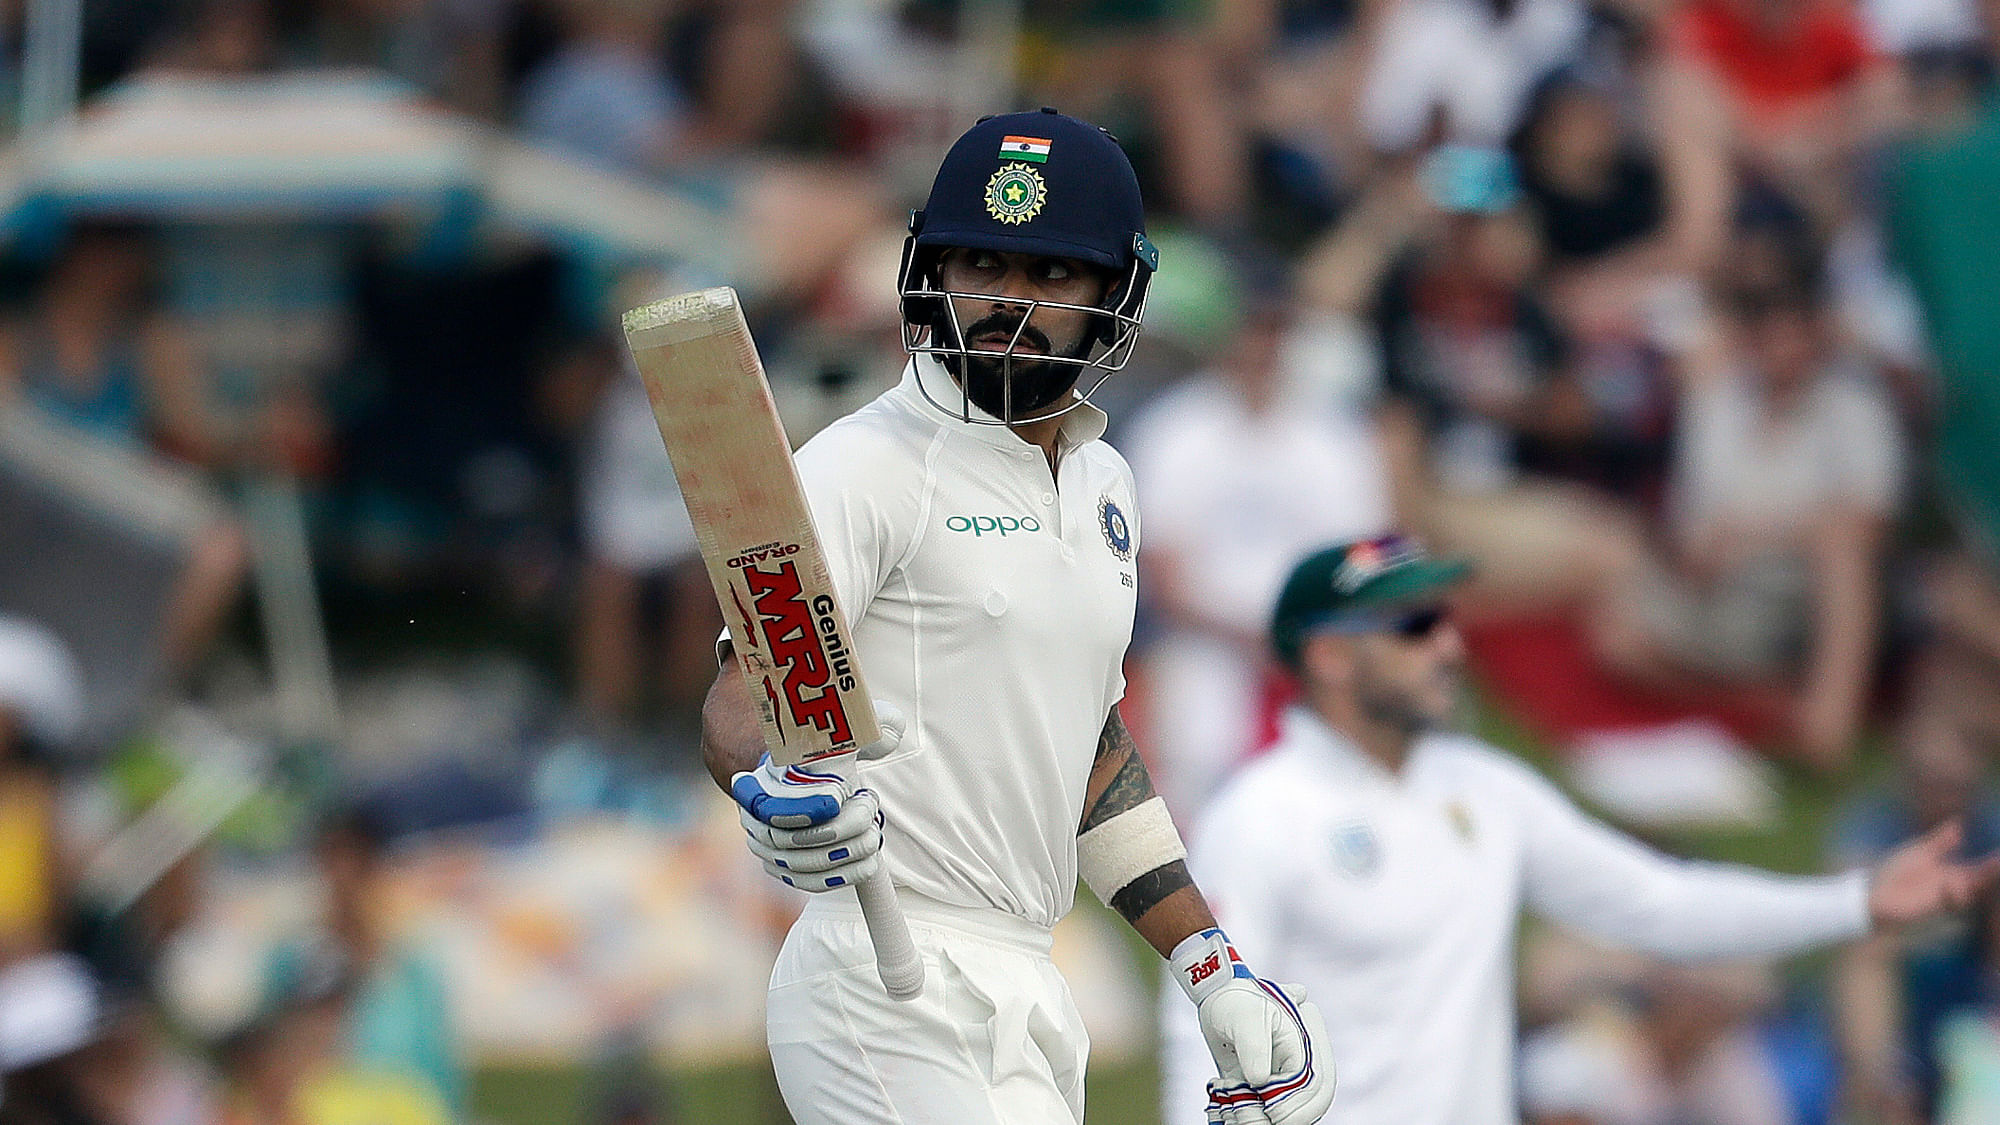 India’s captain Virat Kohli, raises his bat after reaching half century during the second day of the second cricket test match between South Africa and India at Centurion Park in Pretoria, South Africa